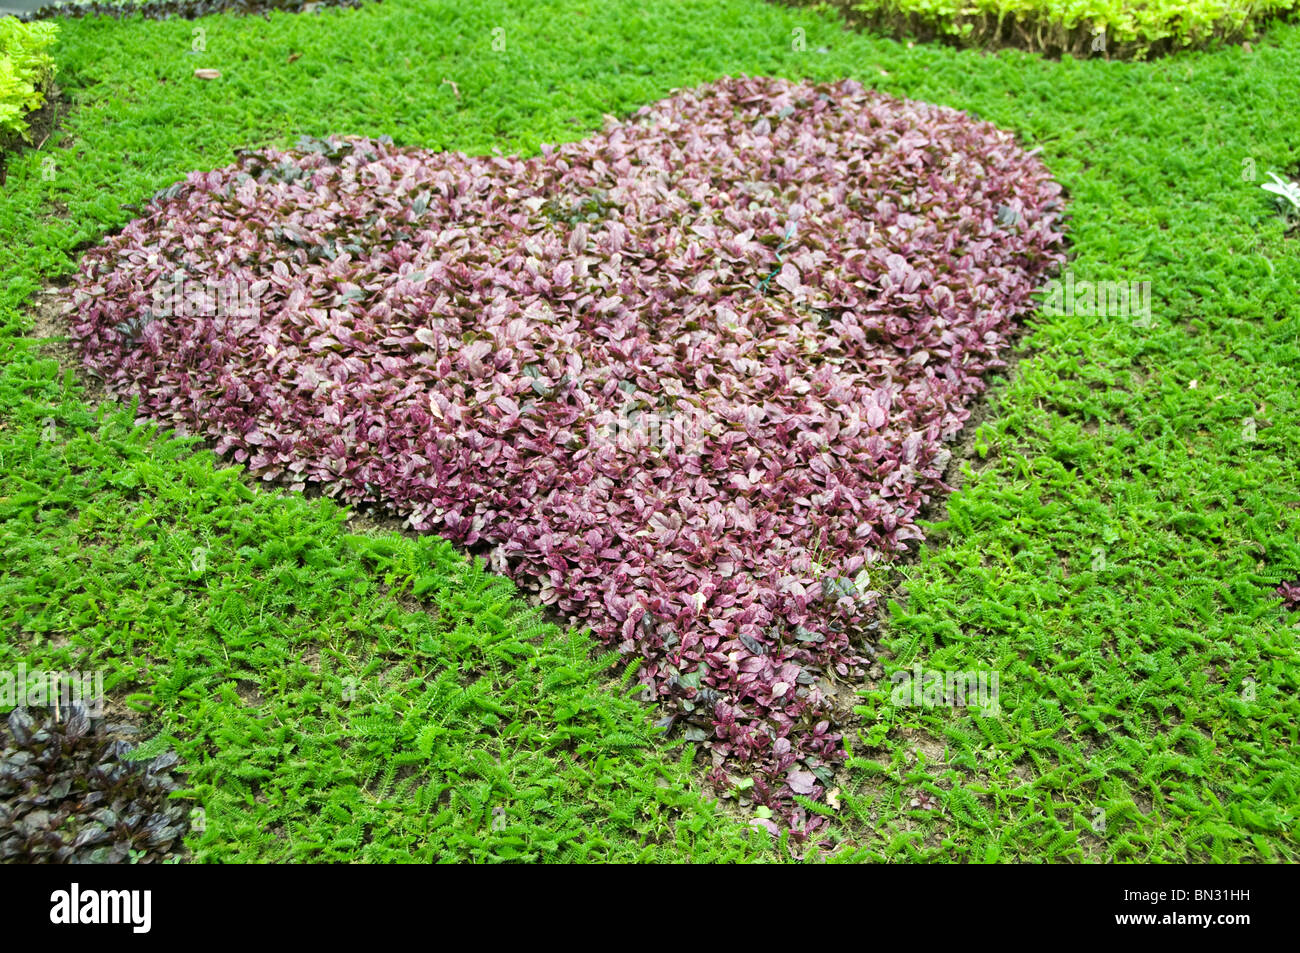 Planted municipal garden with green and red plants in a heart shape Stock Photo